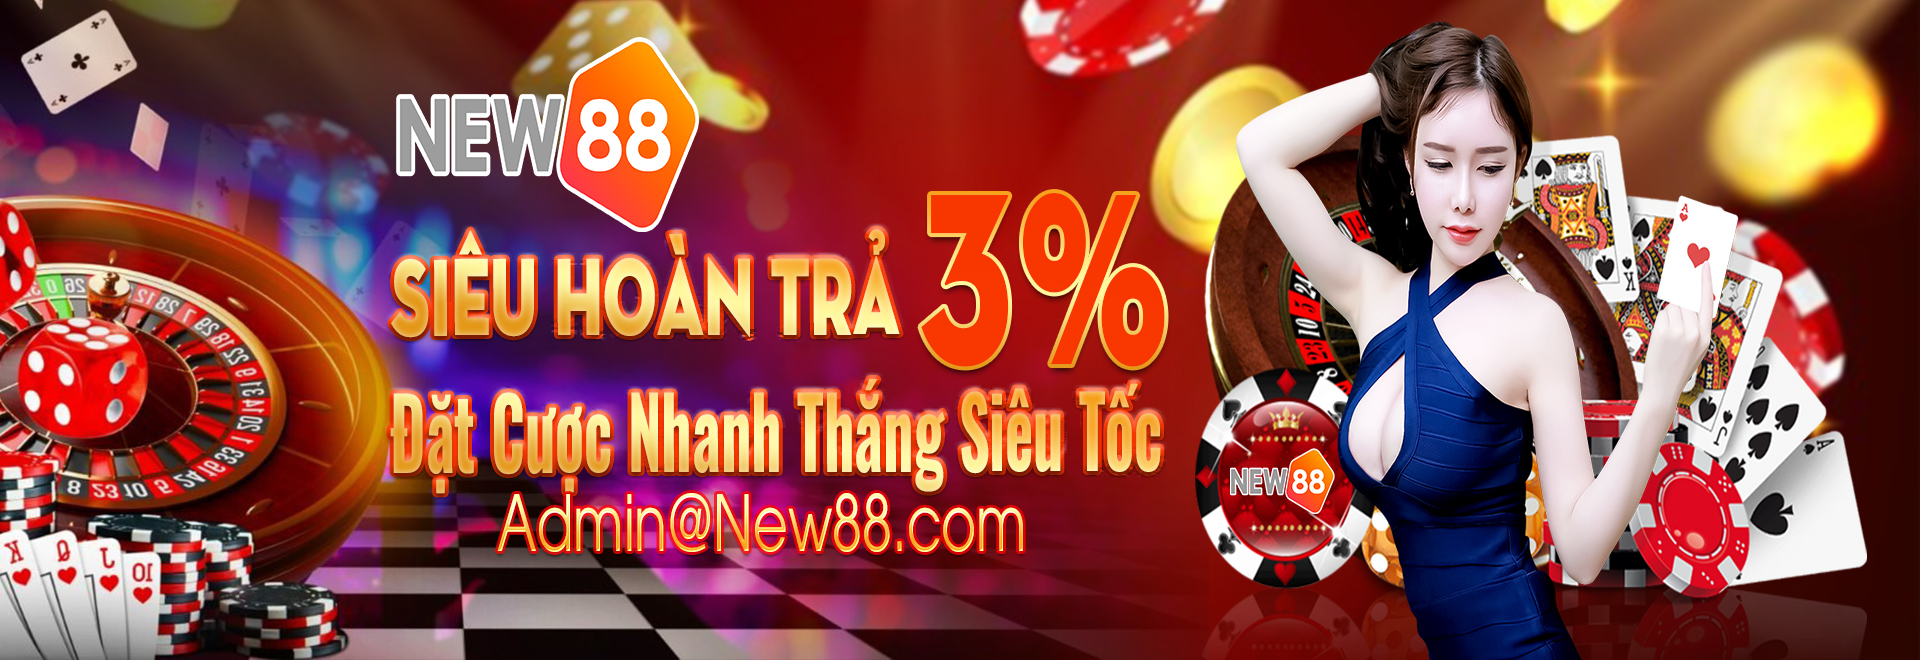 Cổng game New88